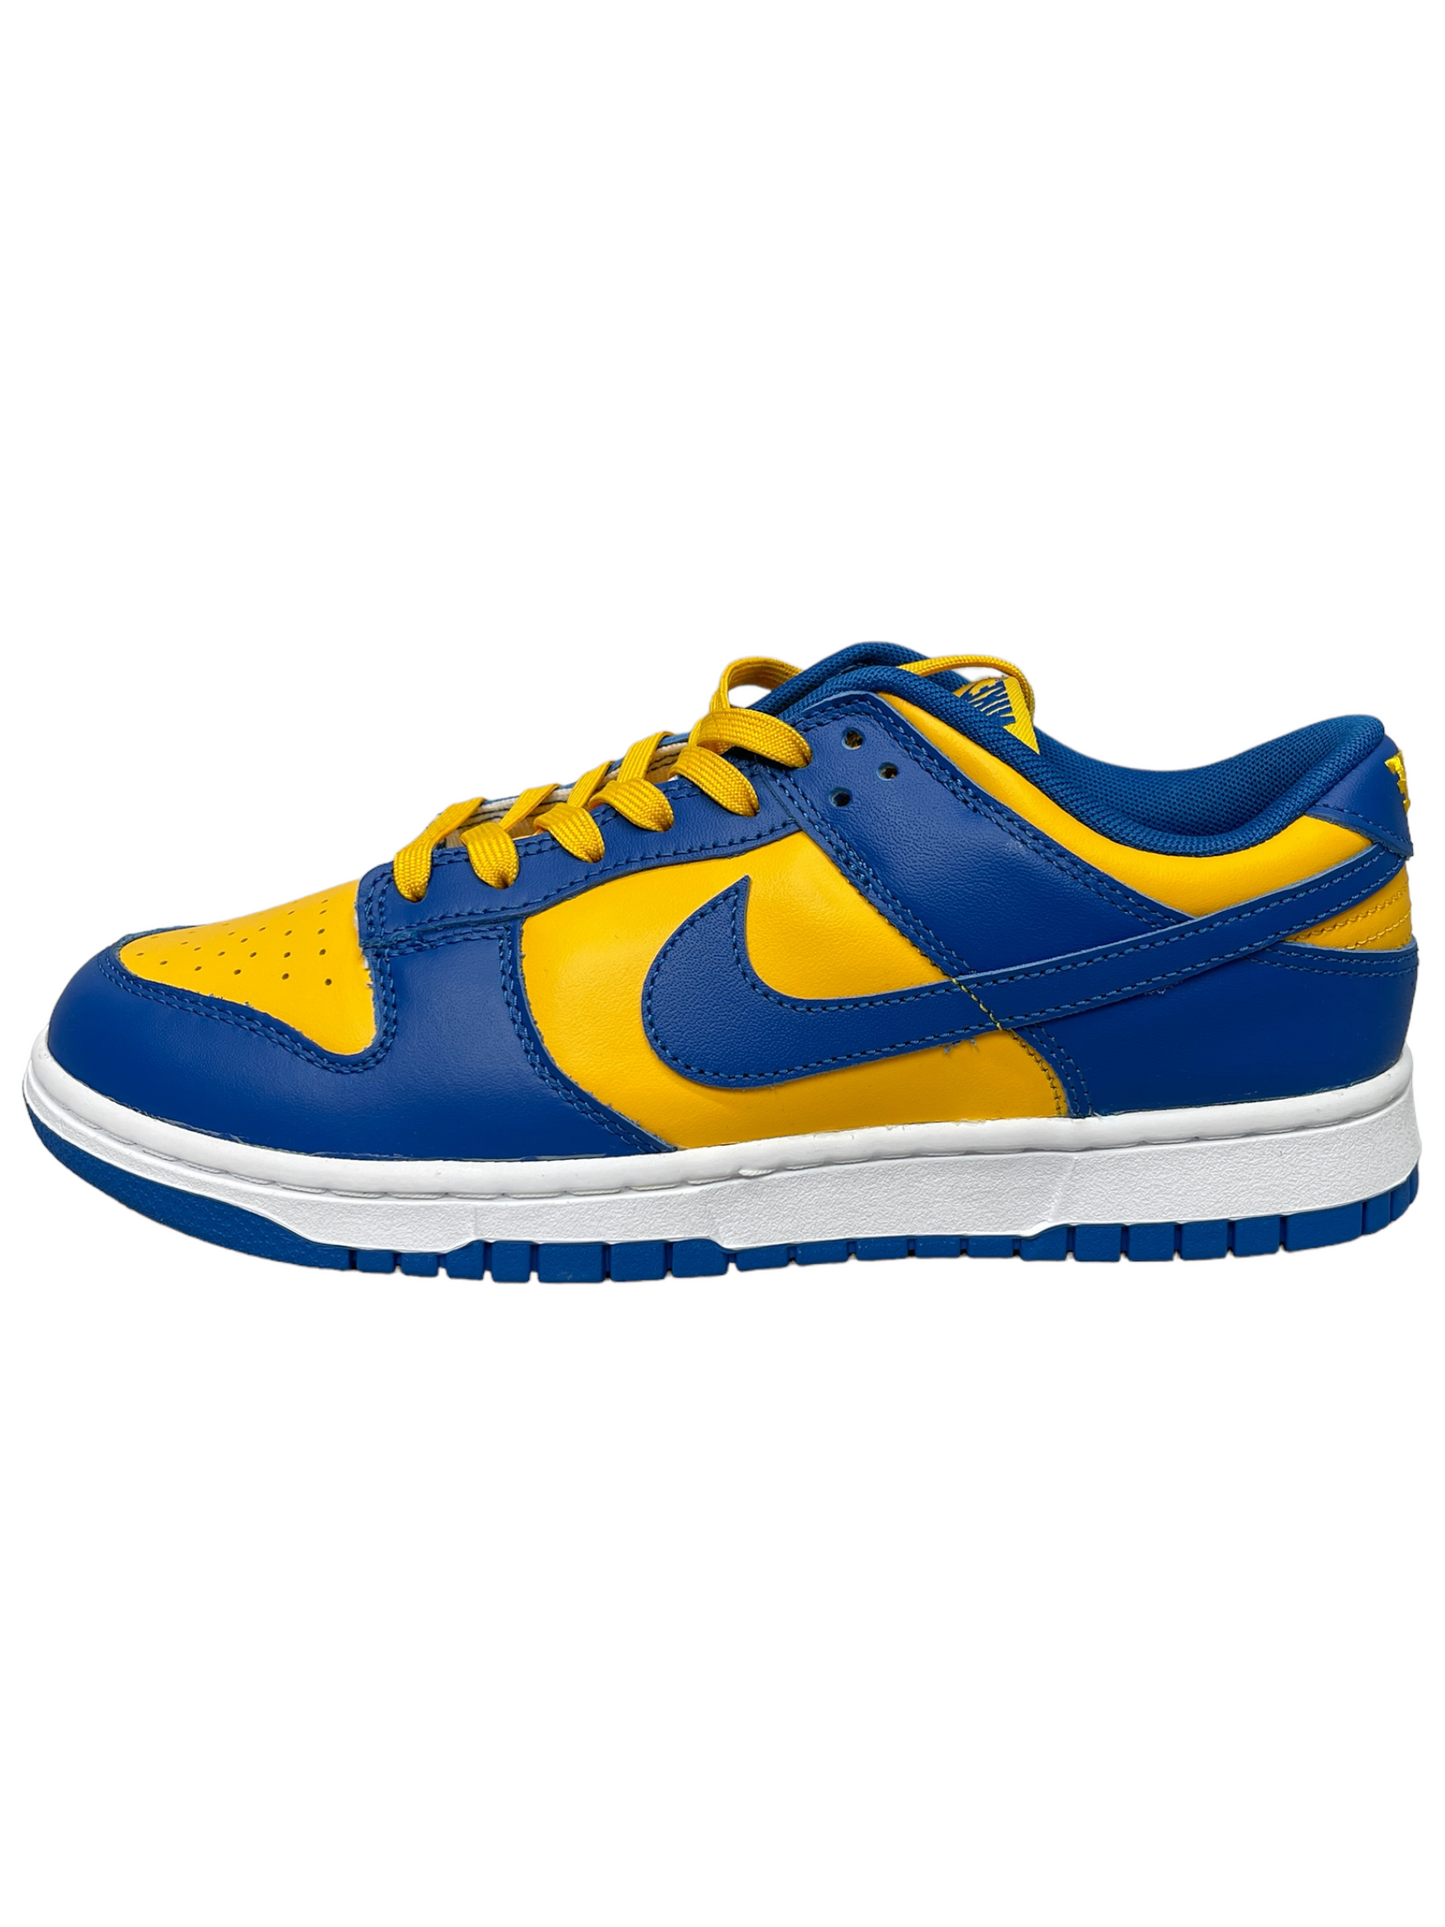 Nike Dunk Low UCLA - Genuine Design Luxury Consignment for Men. New & Pre-Owned Clothing, Shoes, & Accessories. Calgary, Canada